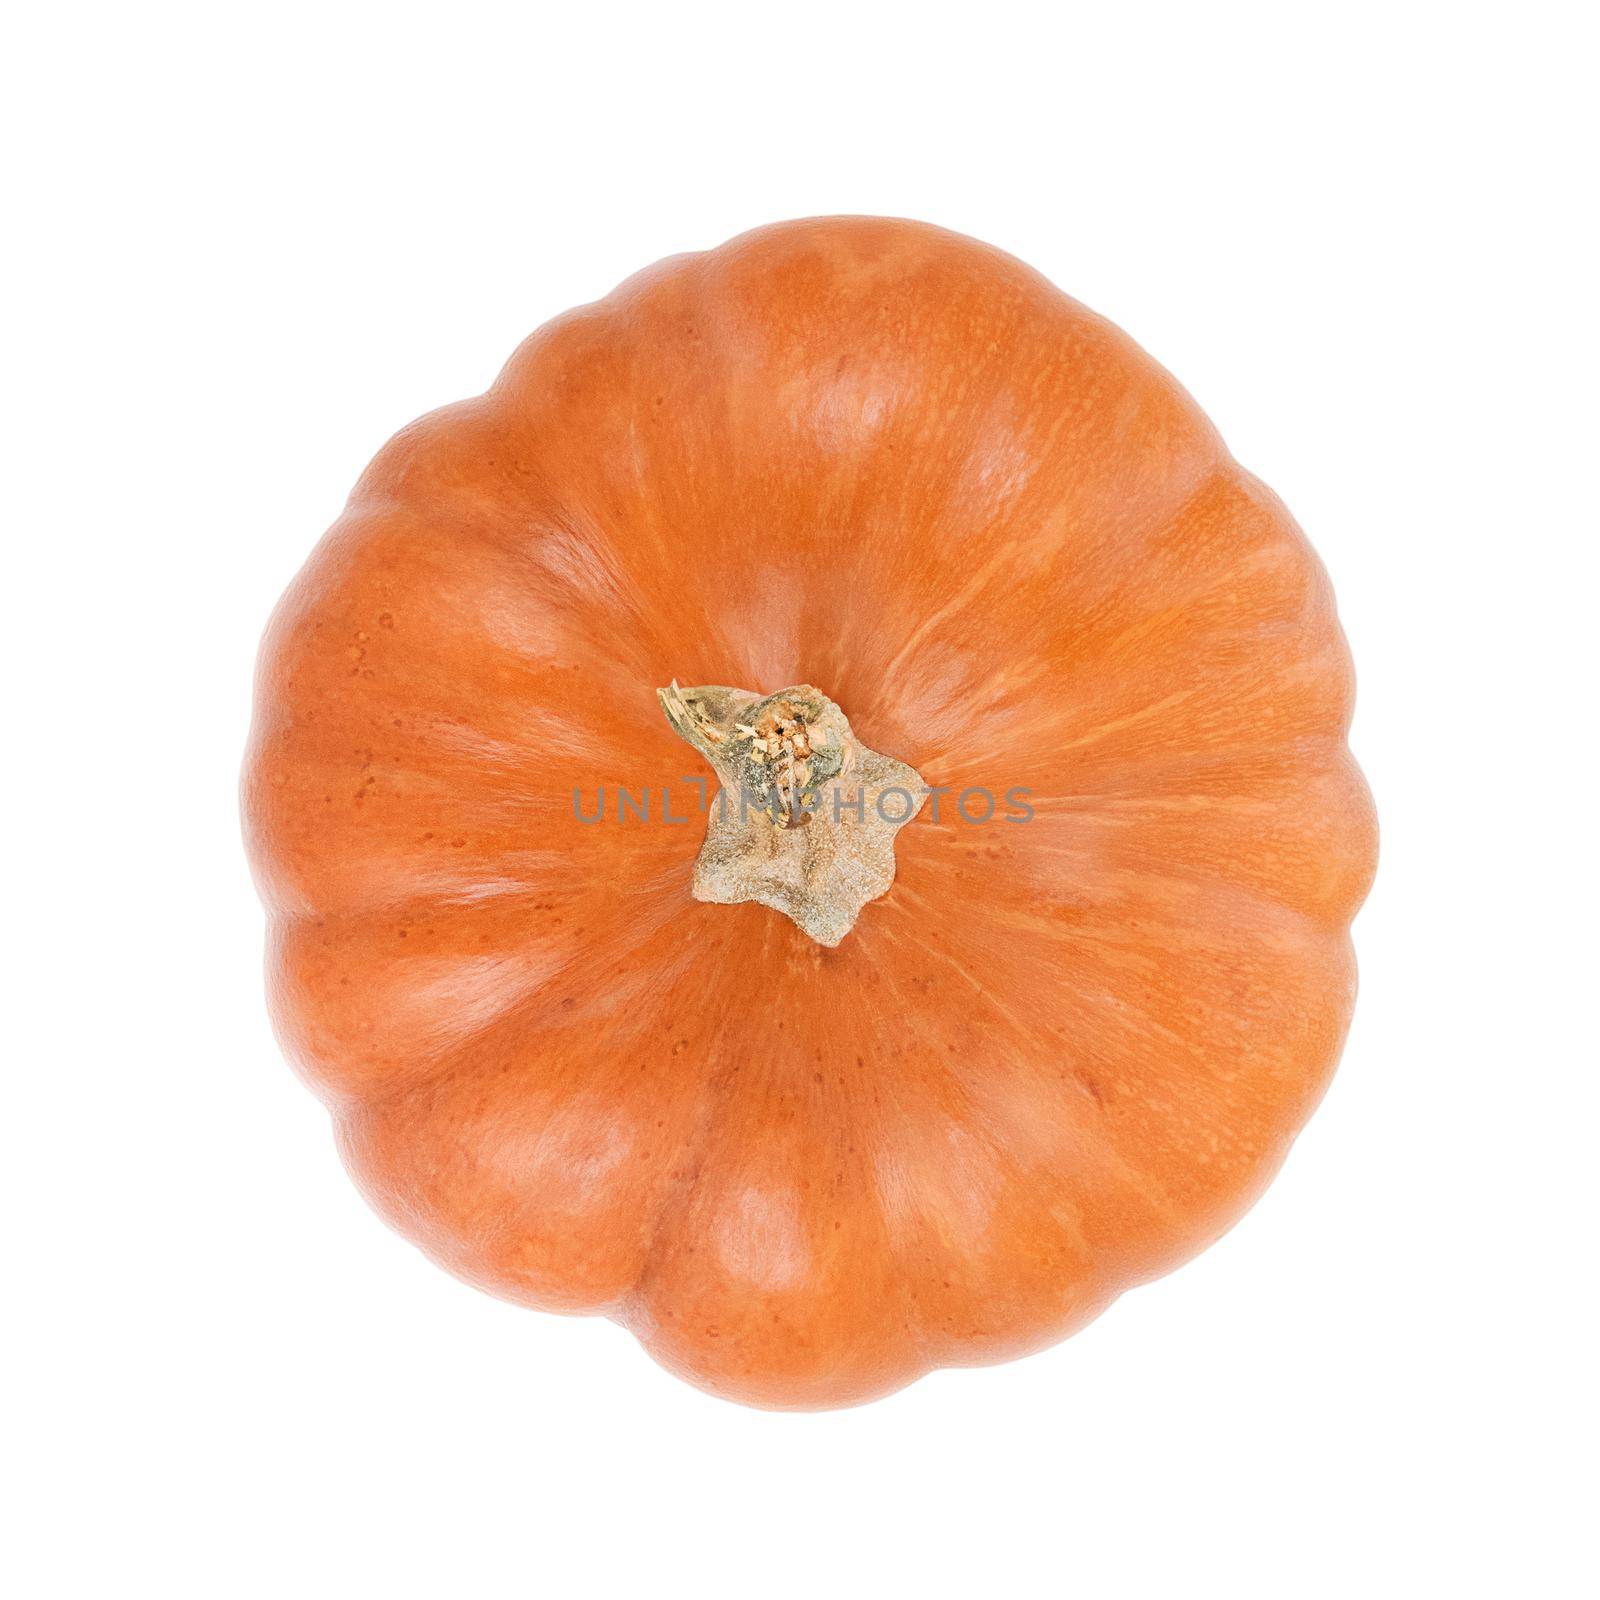 Orange pumpkin top view isolated on a white background.